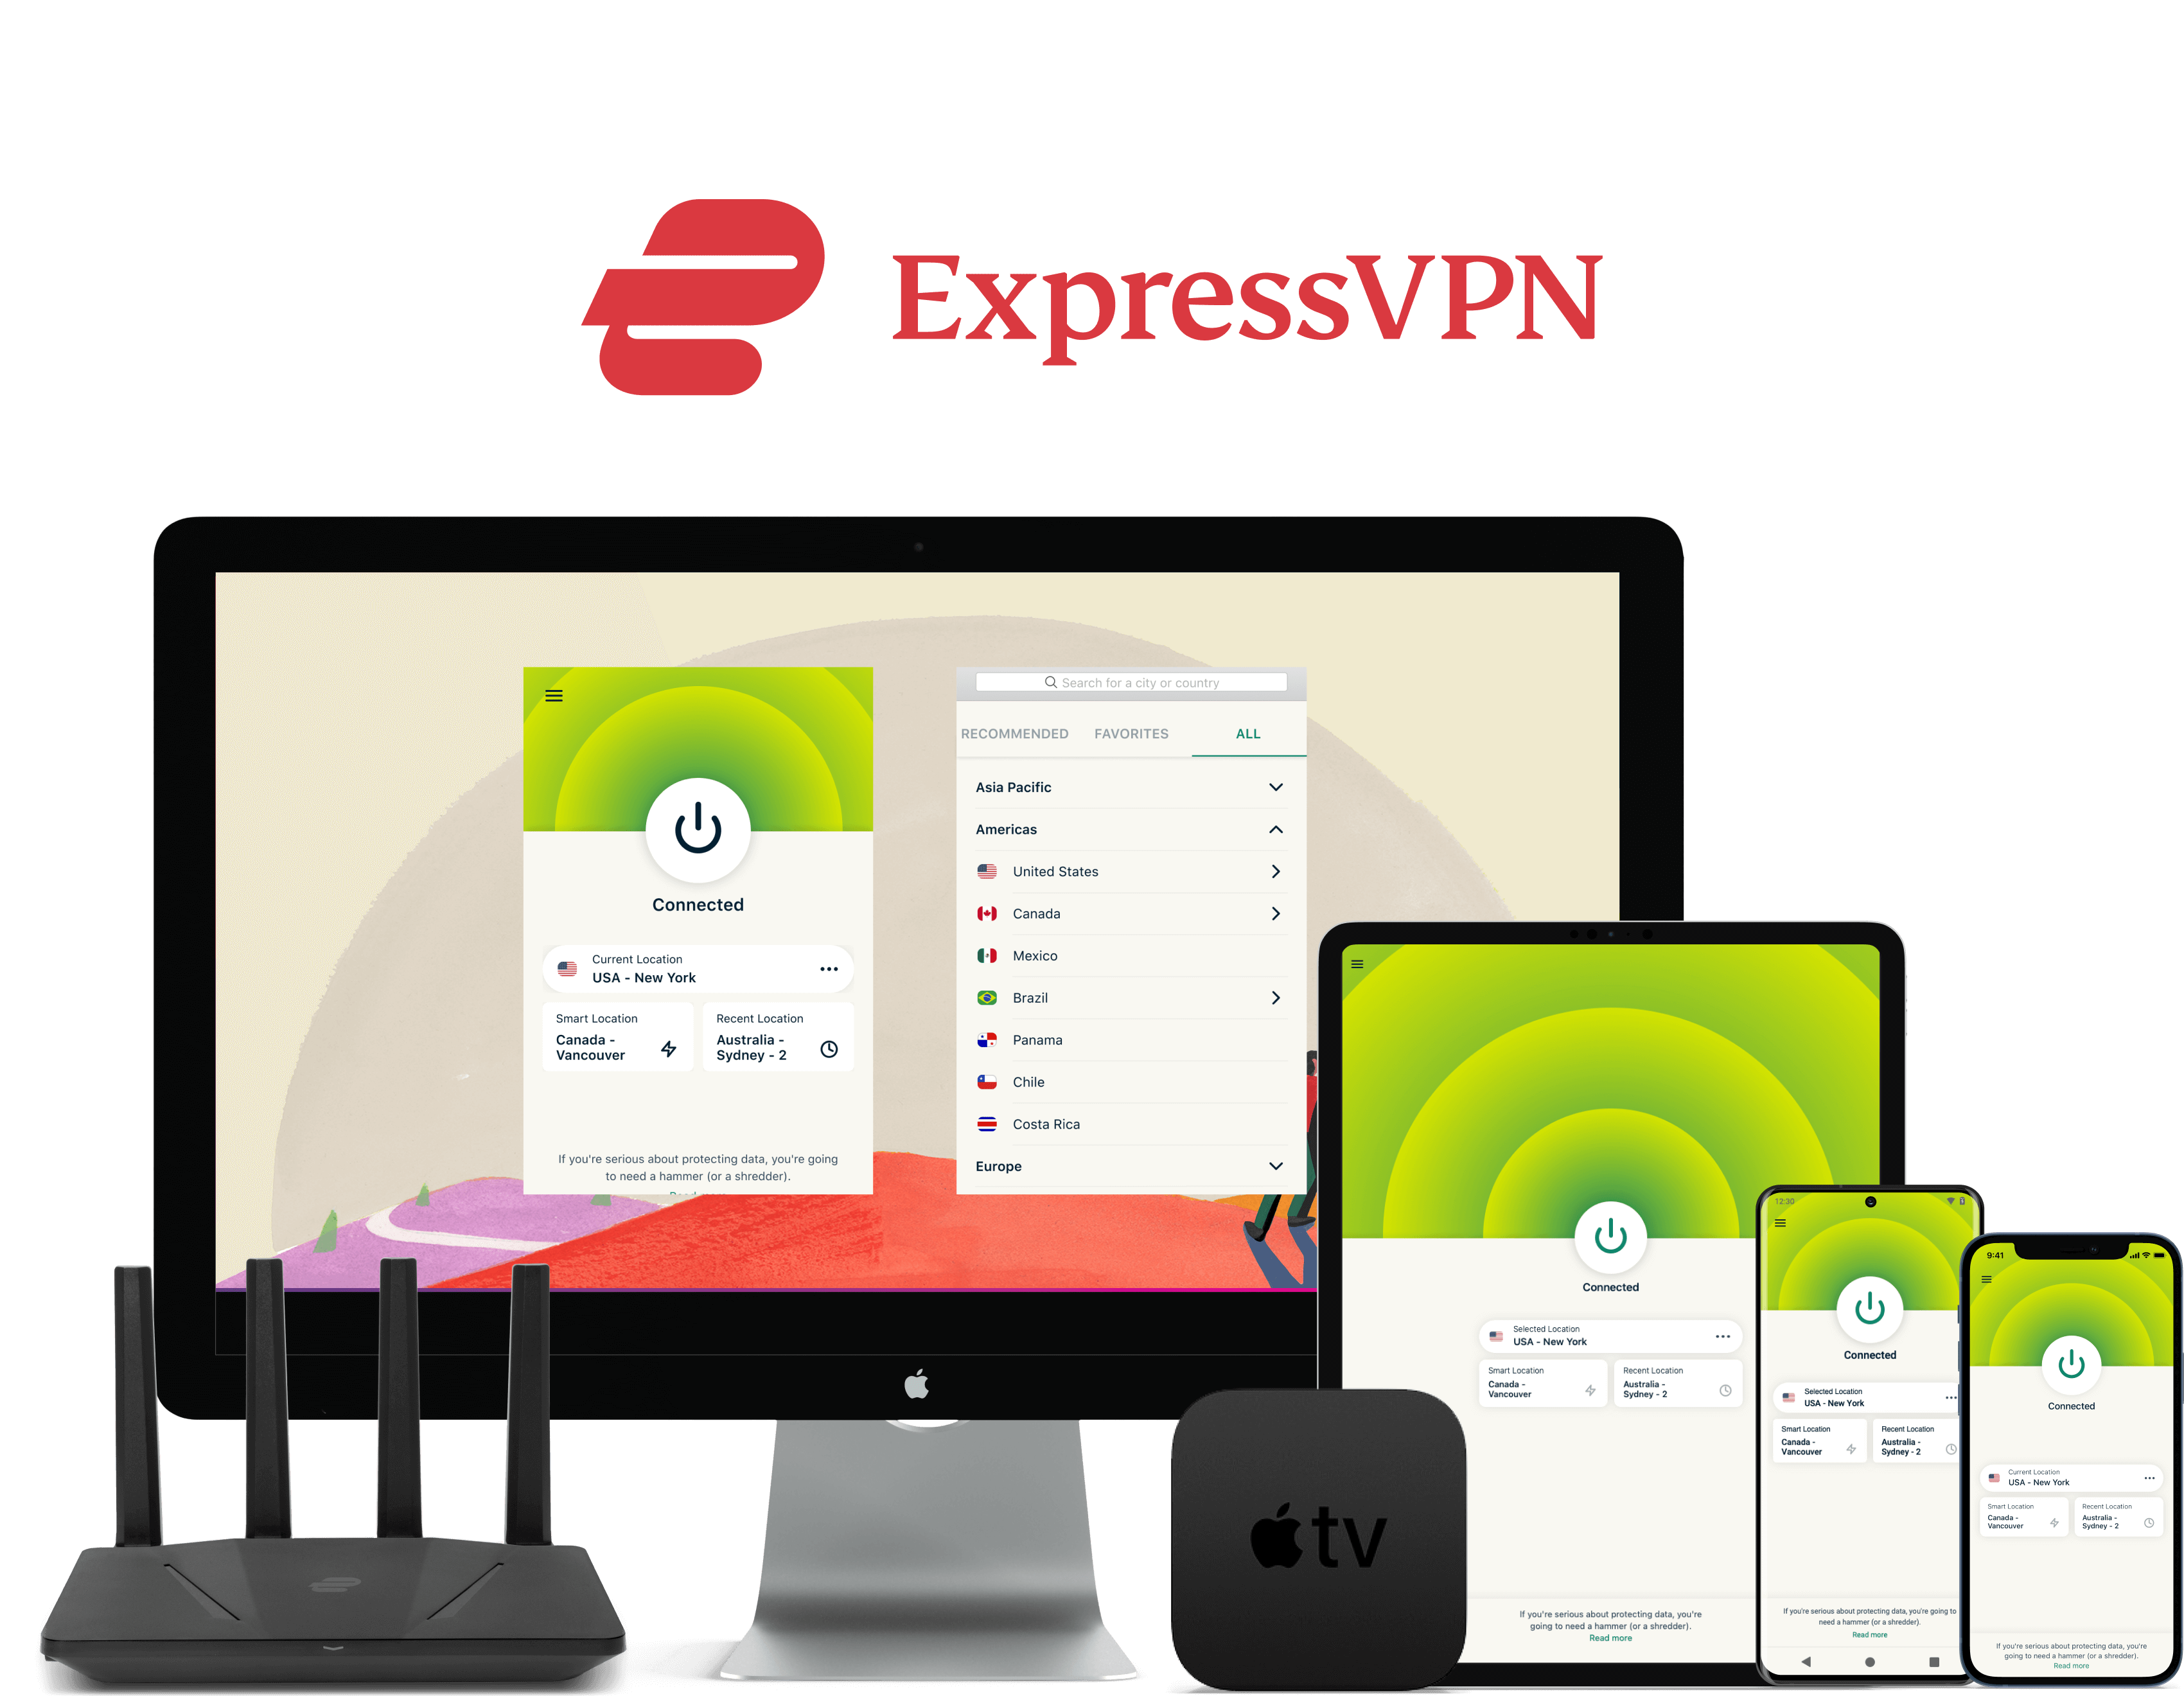 ExpressVPN running on multiple devices, including PC, mobile, and router